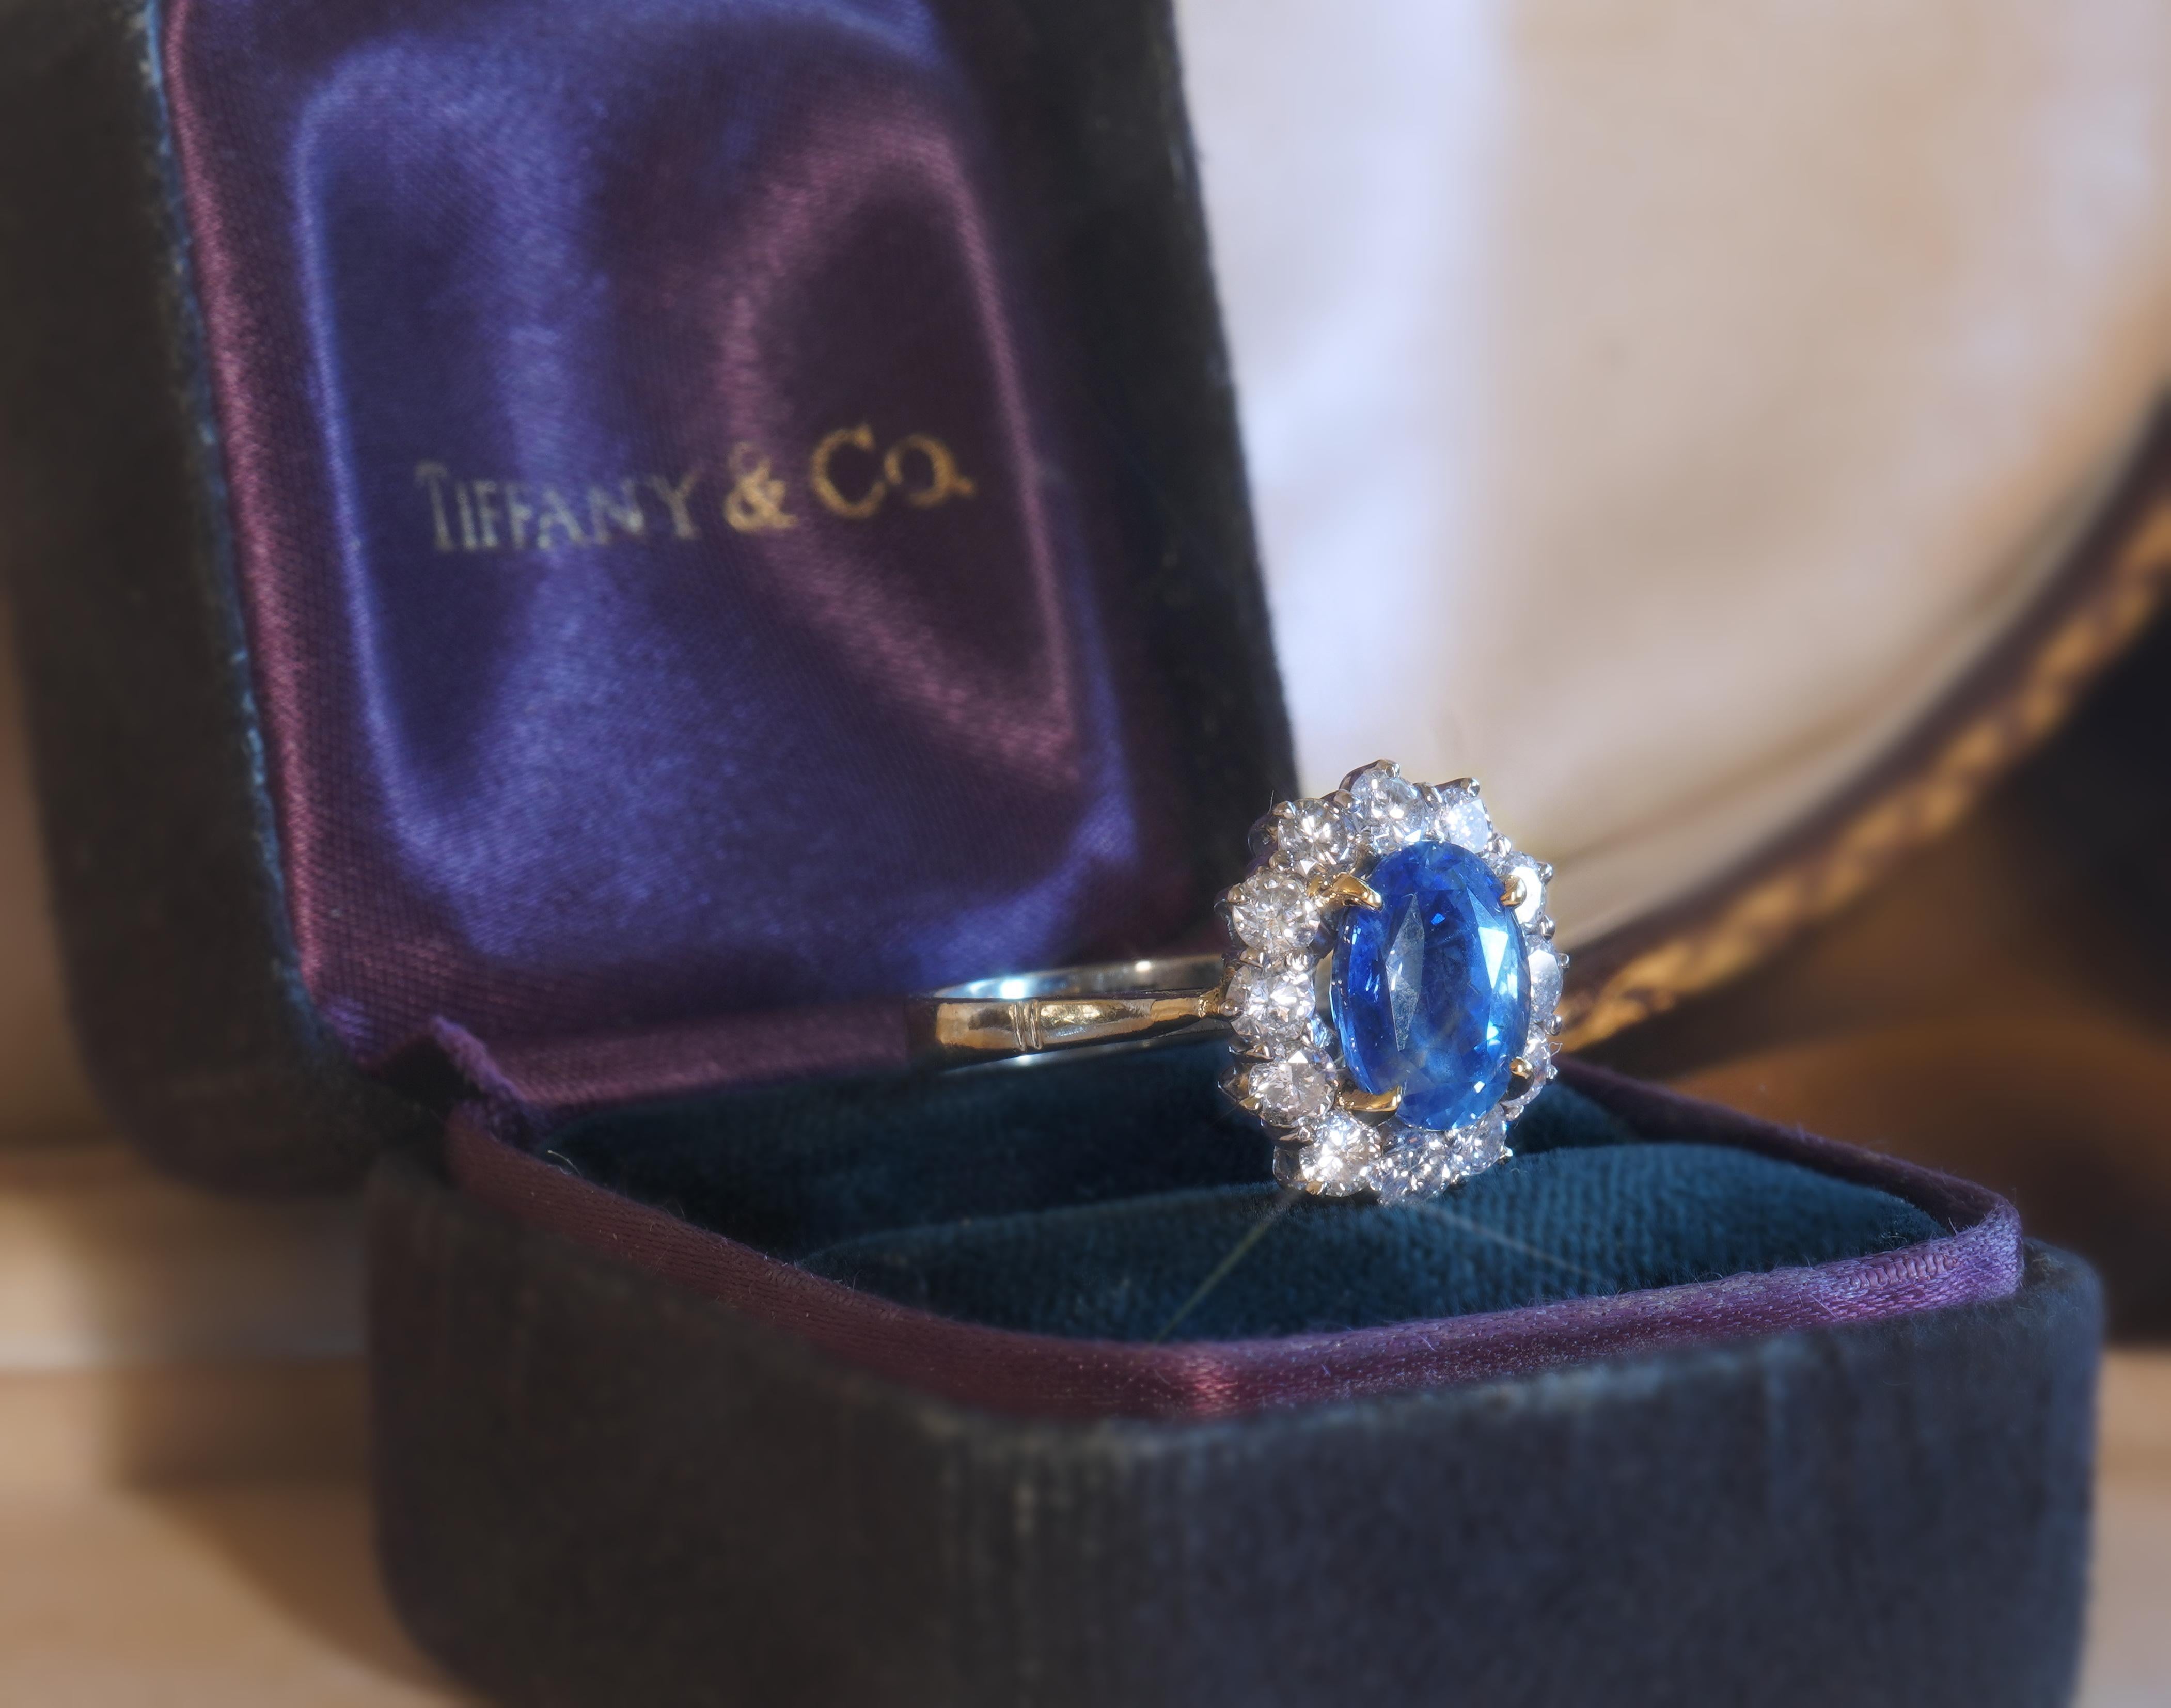 Old South Jewels proudly presents... VINTAGE LUXURY... TIFFANY & CO 18K VINTAGE 4.55 CARAT SAPPHIRE DIAMOND RING!   GIA CERTIFIED 18K RARE UNHEATED SAPPHIRE DIAMOND VINTAGE RING & BOX!  3.21 CARAT BLUE GIA CERTIFIED RARE NO HEAT NATURAL SAPPHIRE. 